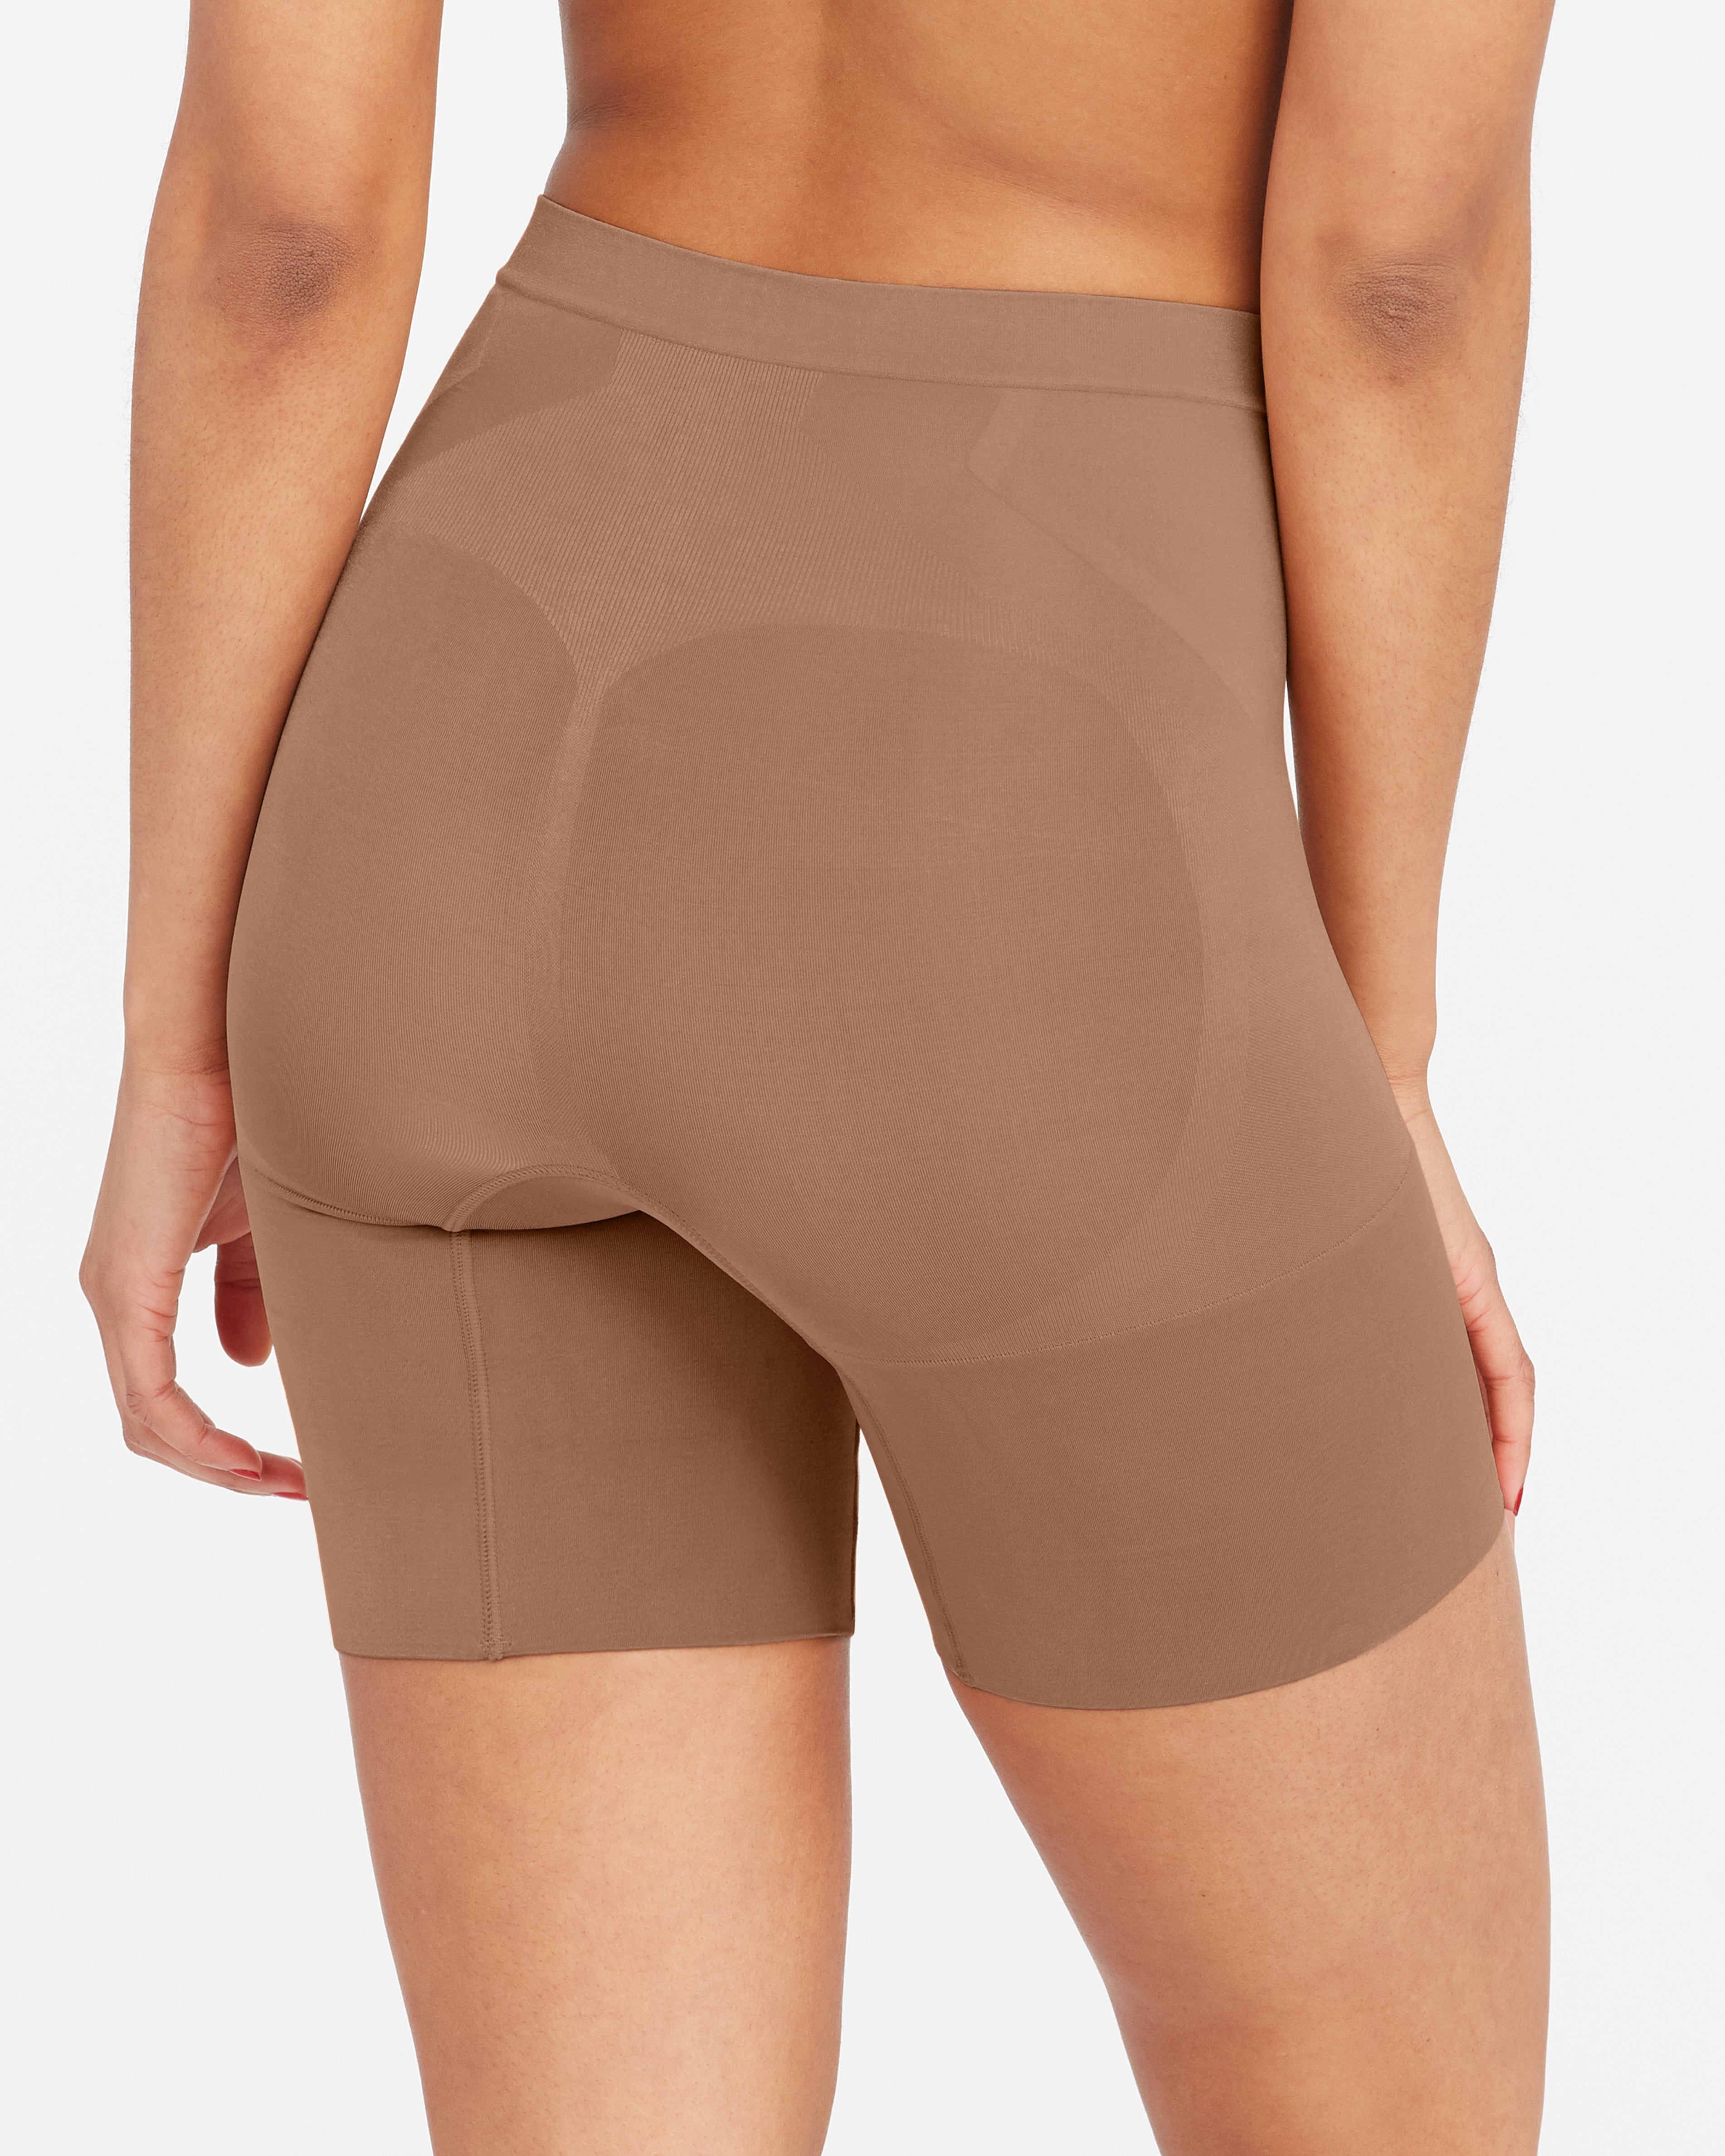 SPANX Assets Red Hot Label Mid-Thigh Primer Lightweight Slimming Shorts  (Small, Champagne Nude)